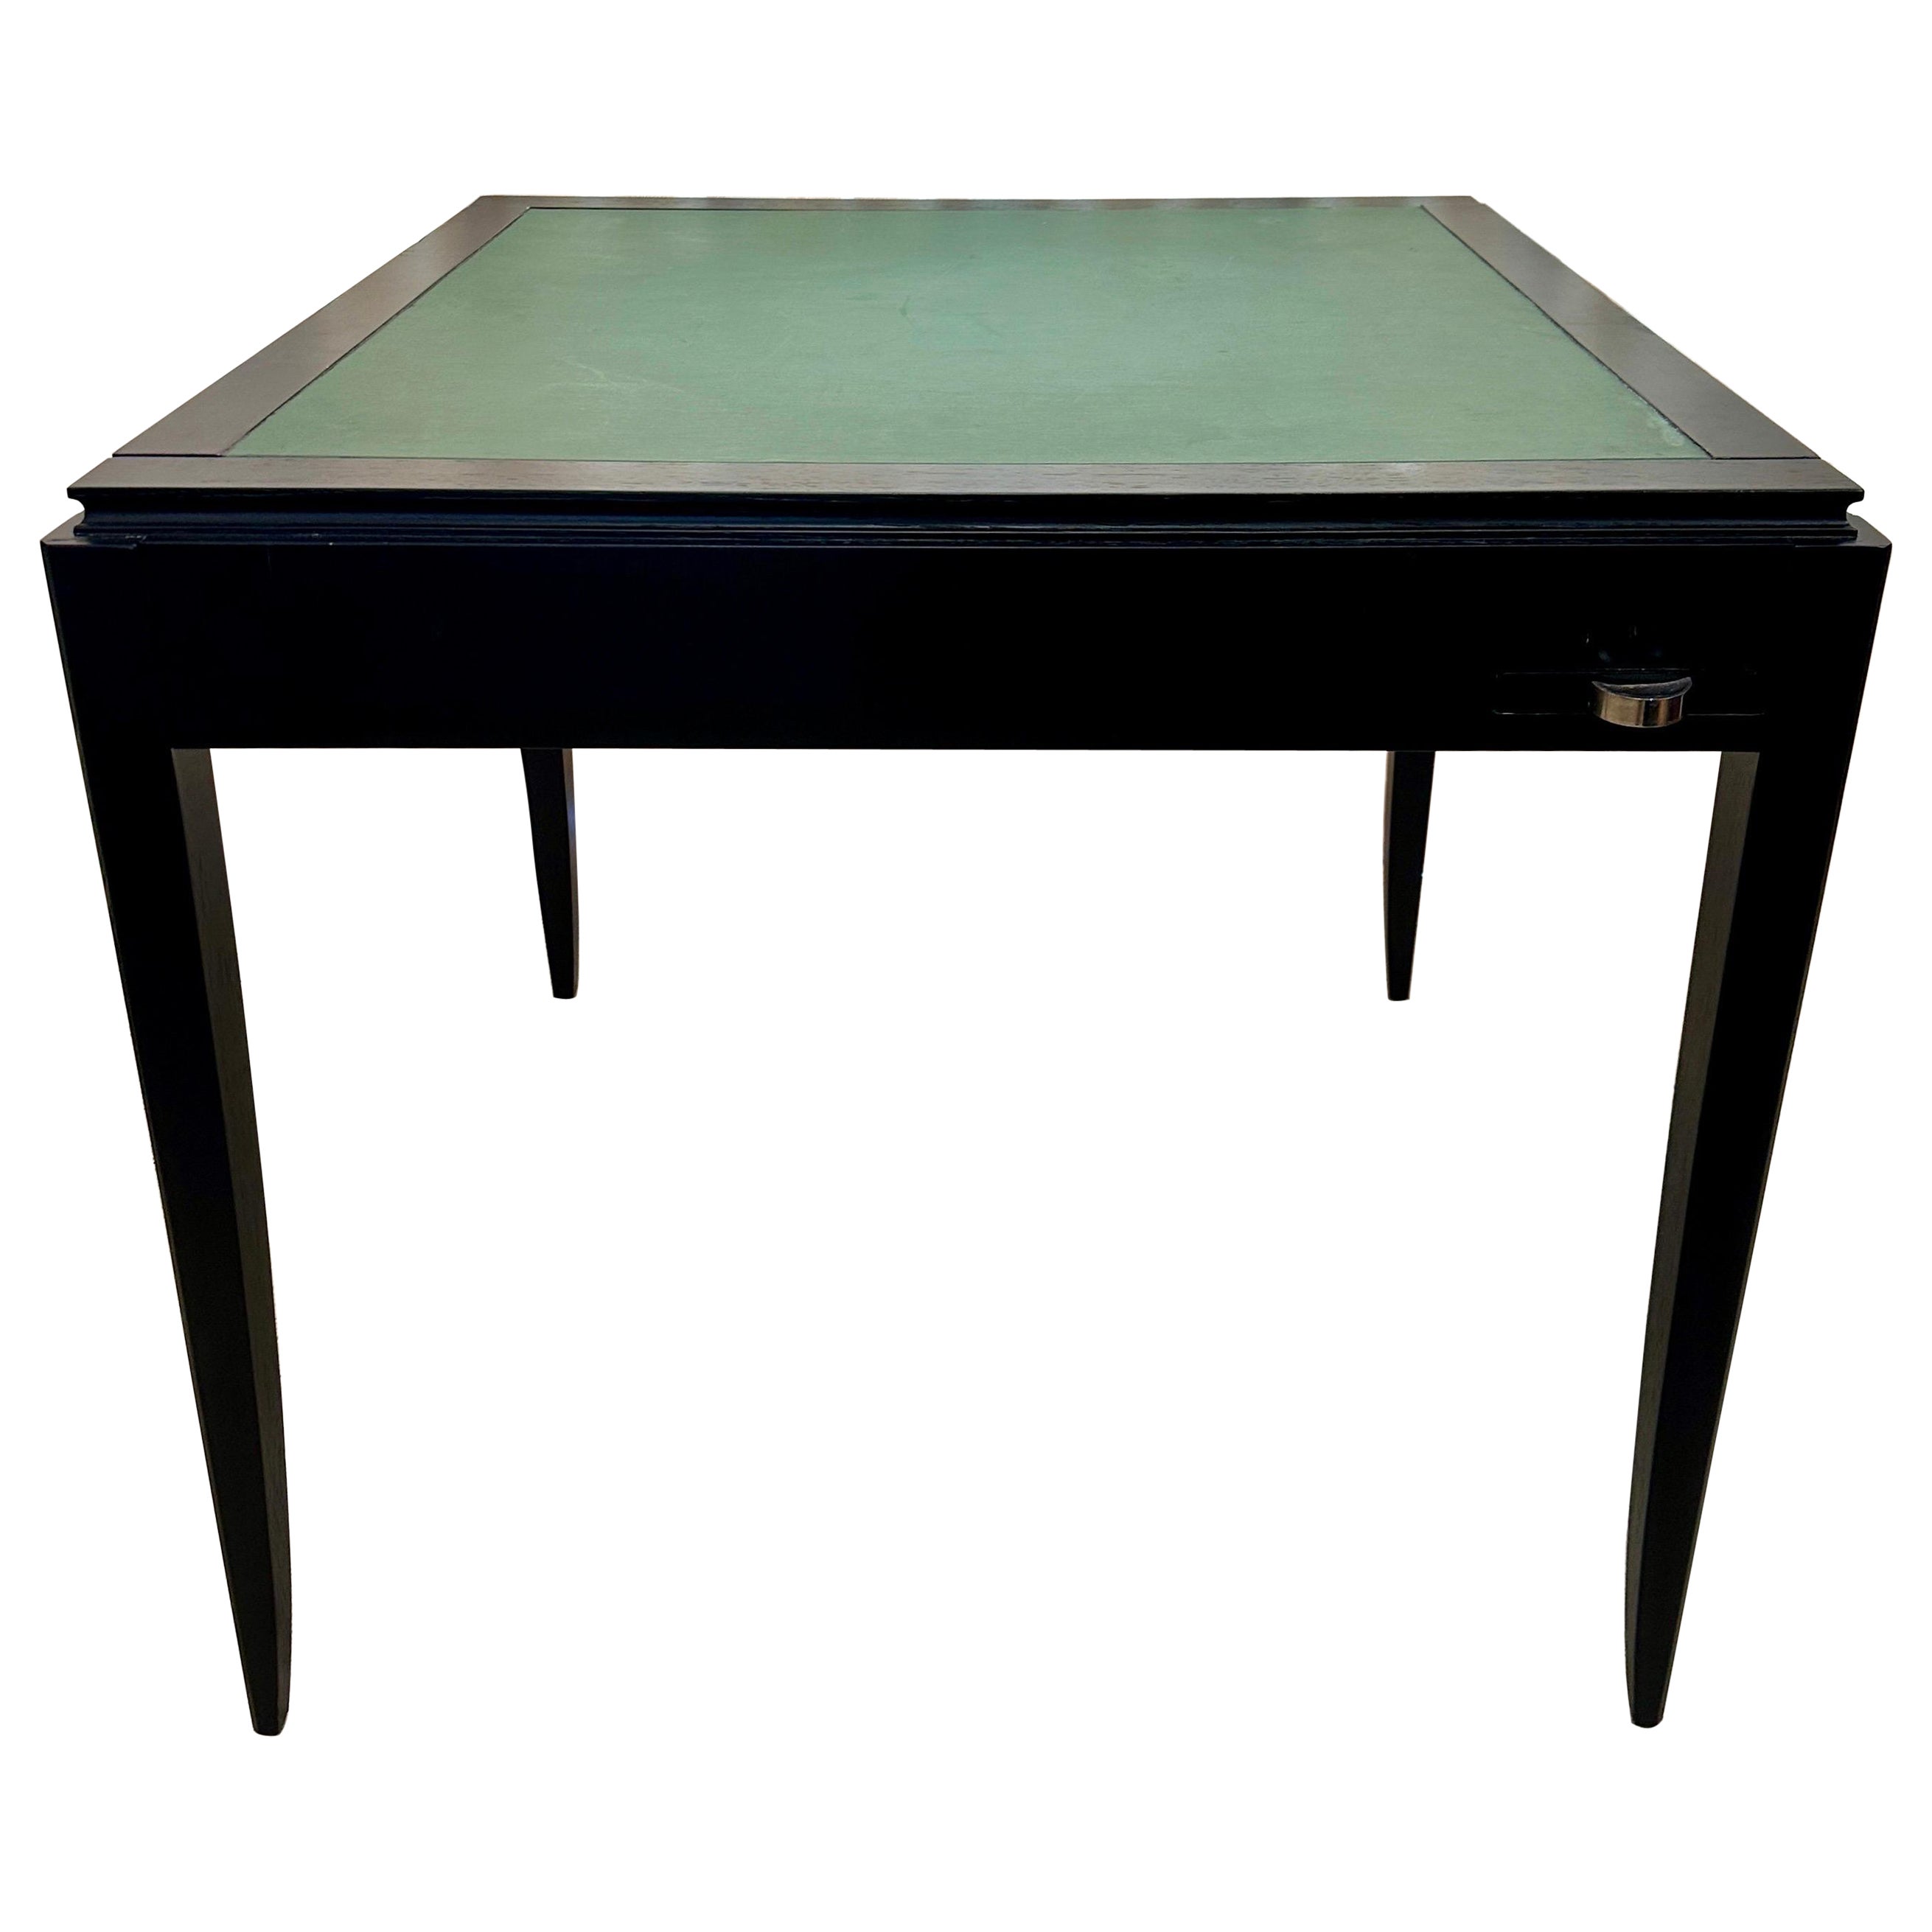 French Art Deco Ebonized Cerused Oak Game Table from 1940's